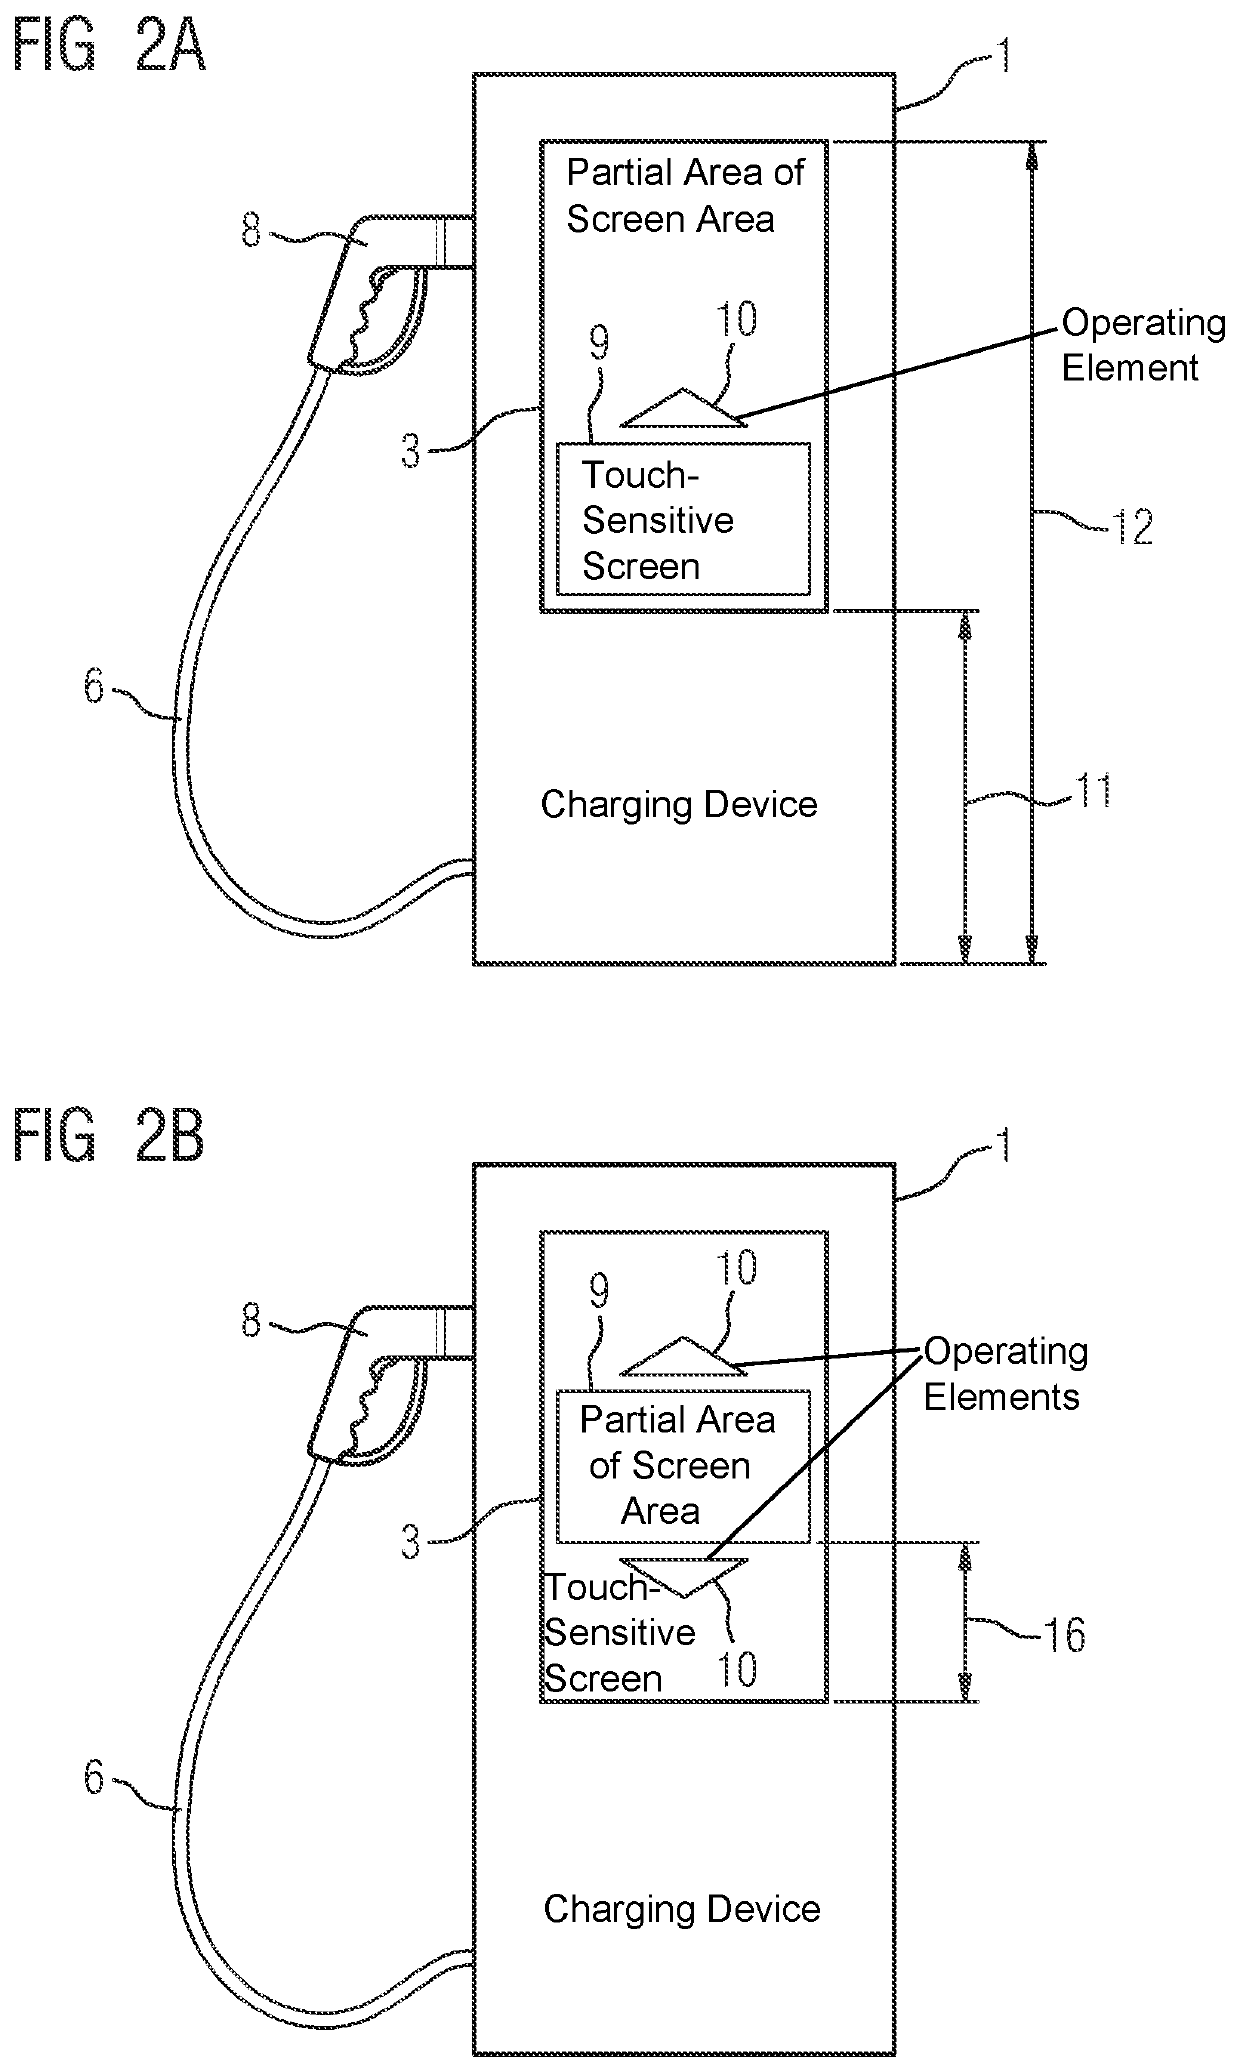 Accessible charging device